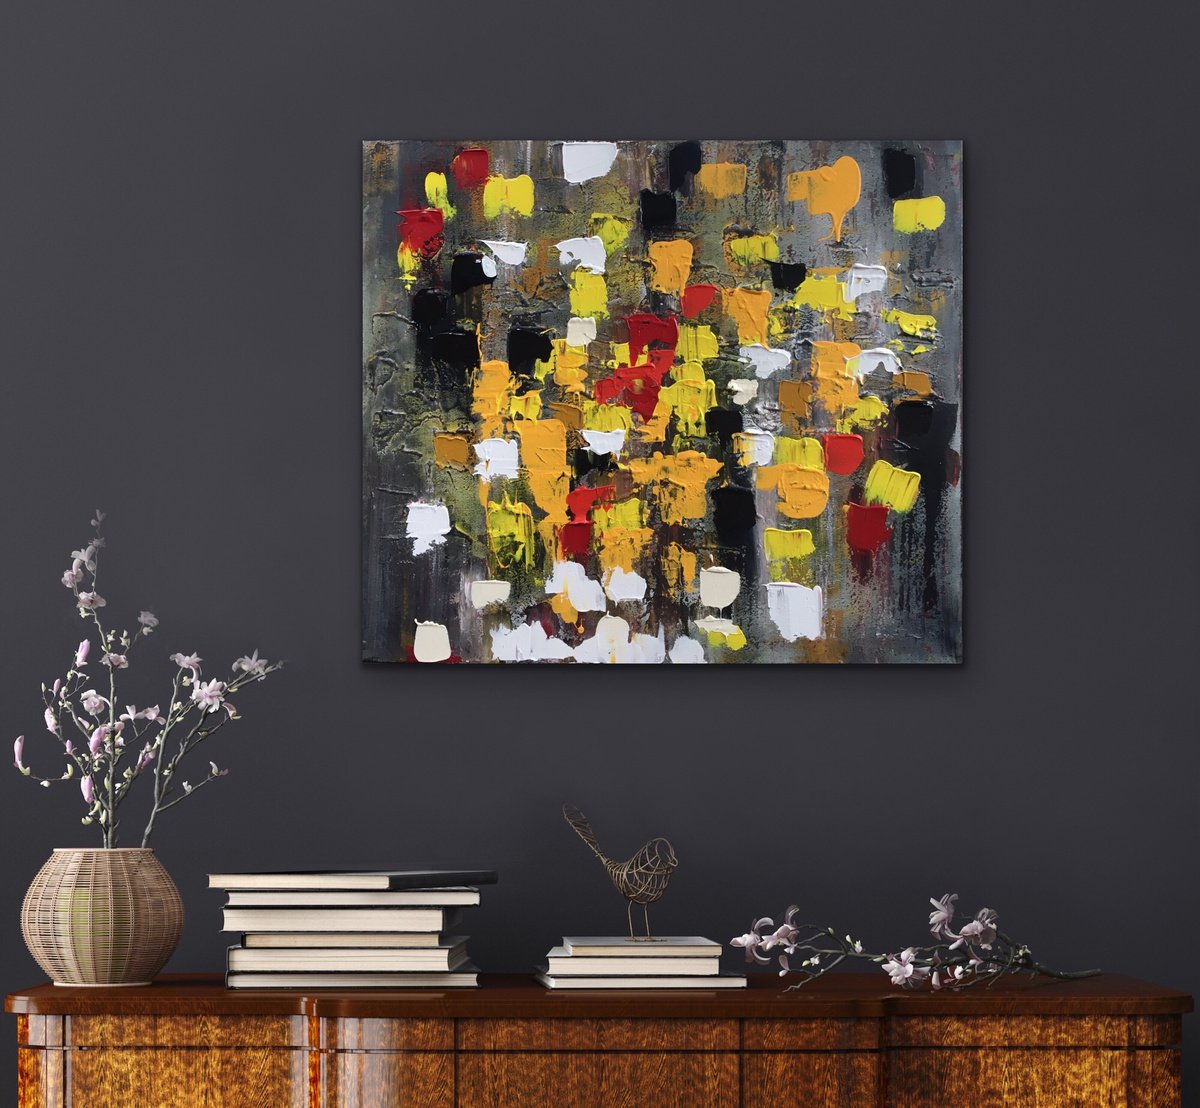 Colourful Rain - Square - Medium Size - Ready to Hang up - Abstract by Alessandra Viola